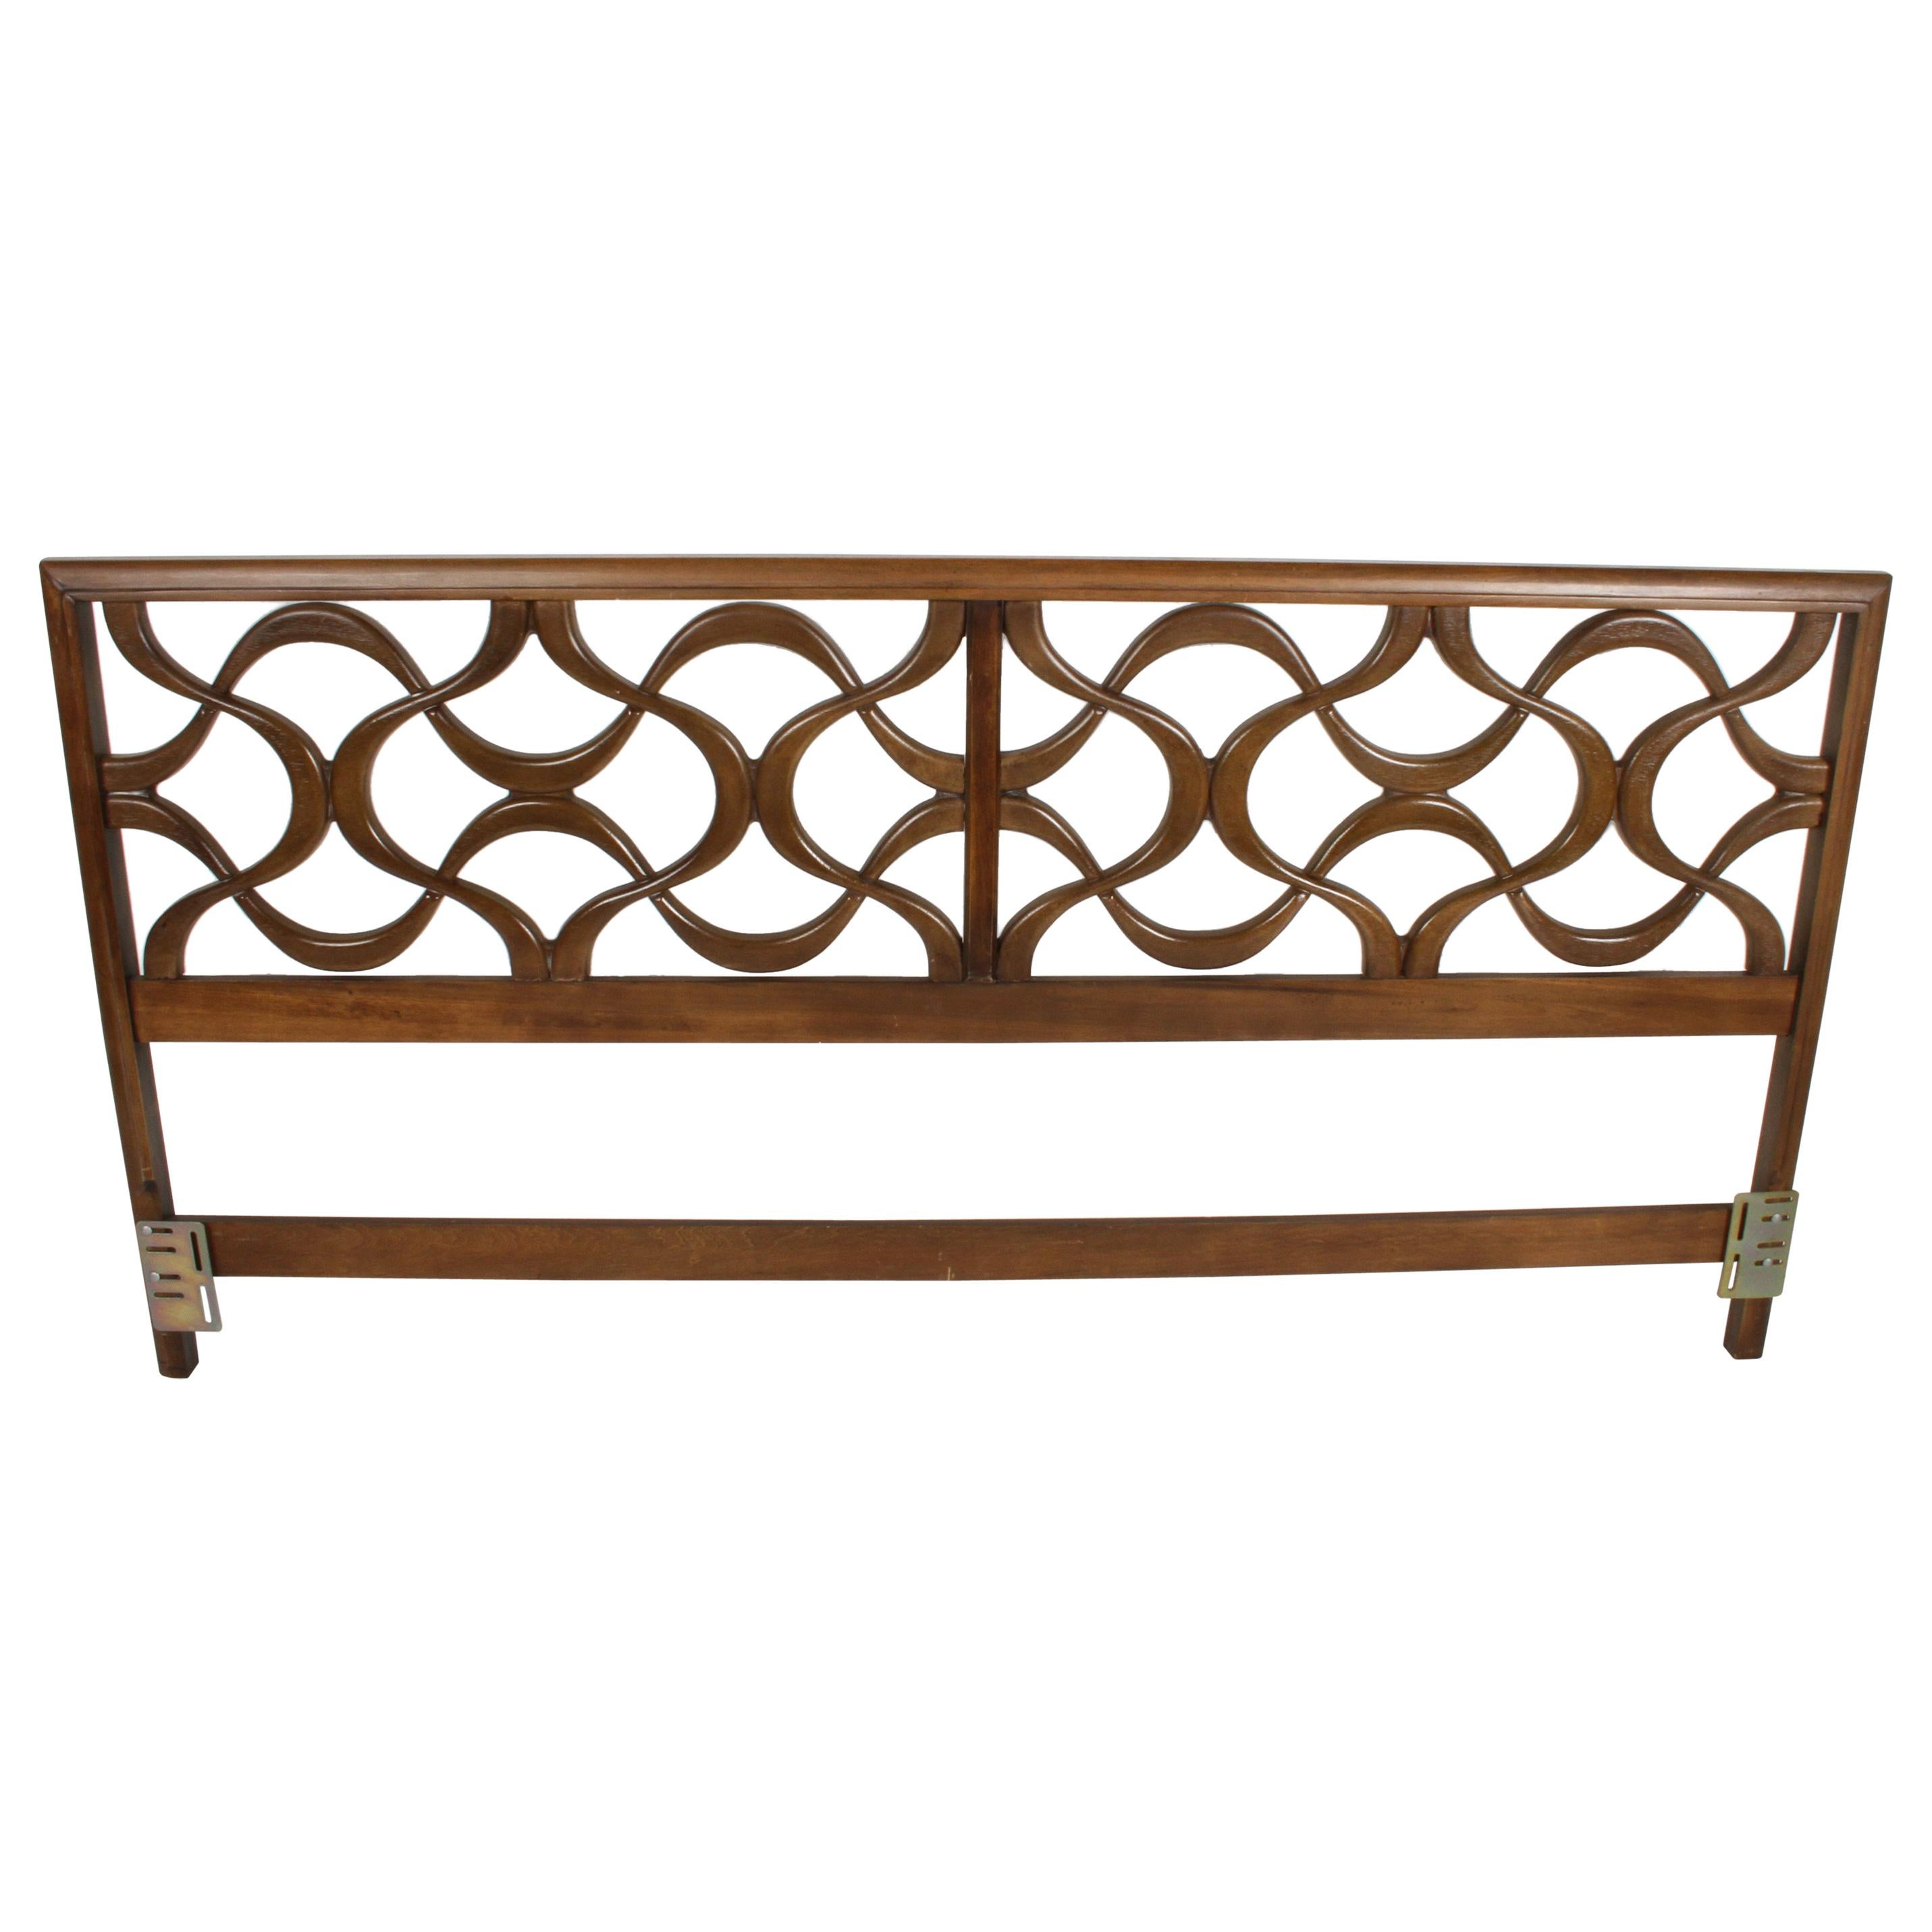 Stanley Furniture "Theme II" Line, Midcentury Sculptural King Size Headboard For Sale